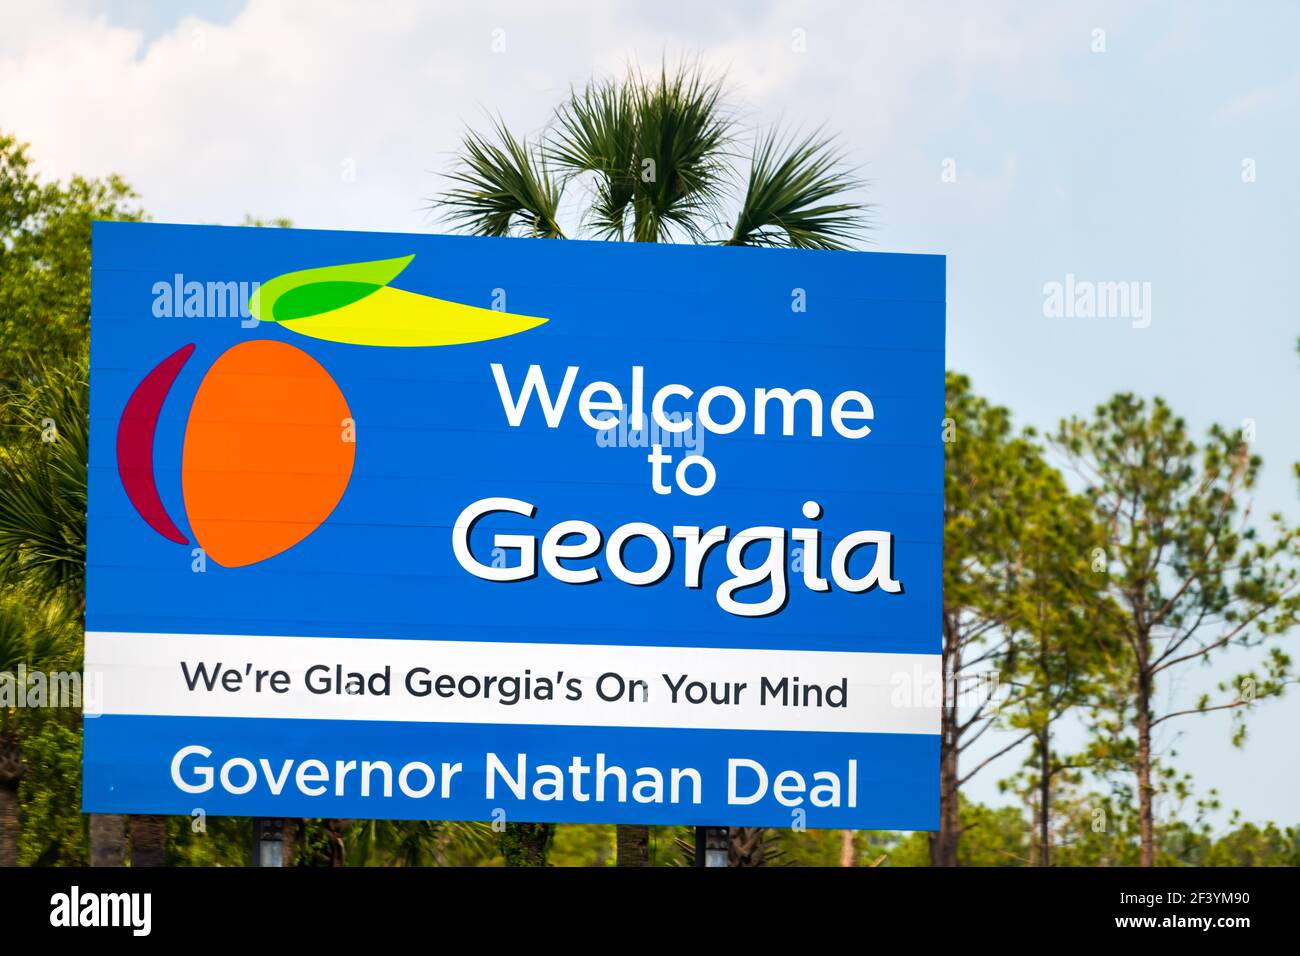 Kingsland, USA - May 10, 2018: Welcome to Georgia sign with We are glad Georgia's on your mind text with governor Nathan Deal Stock Photo